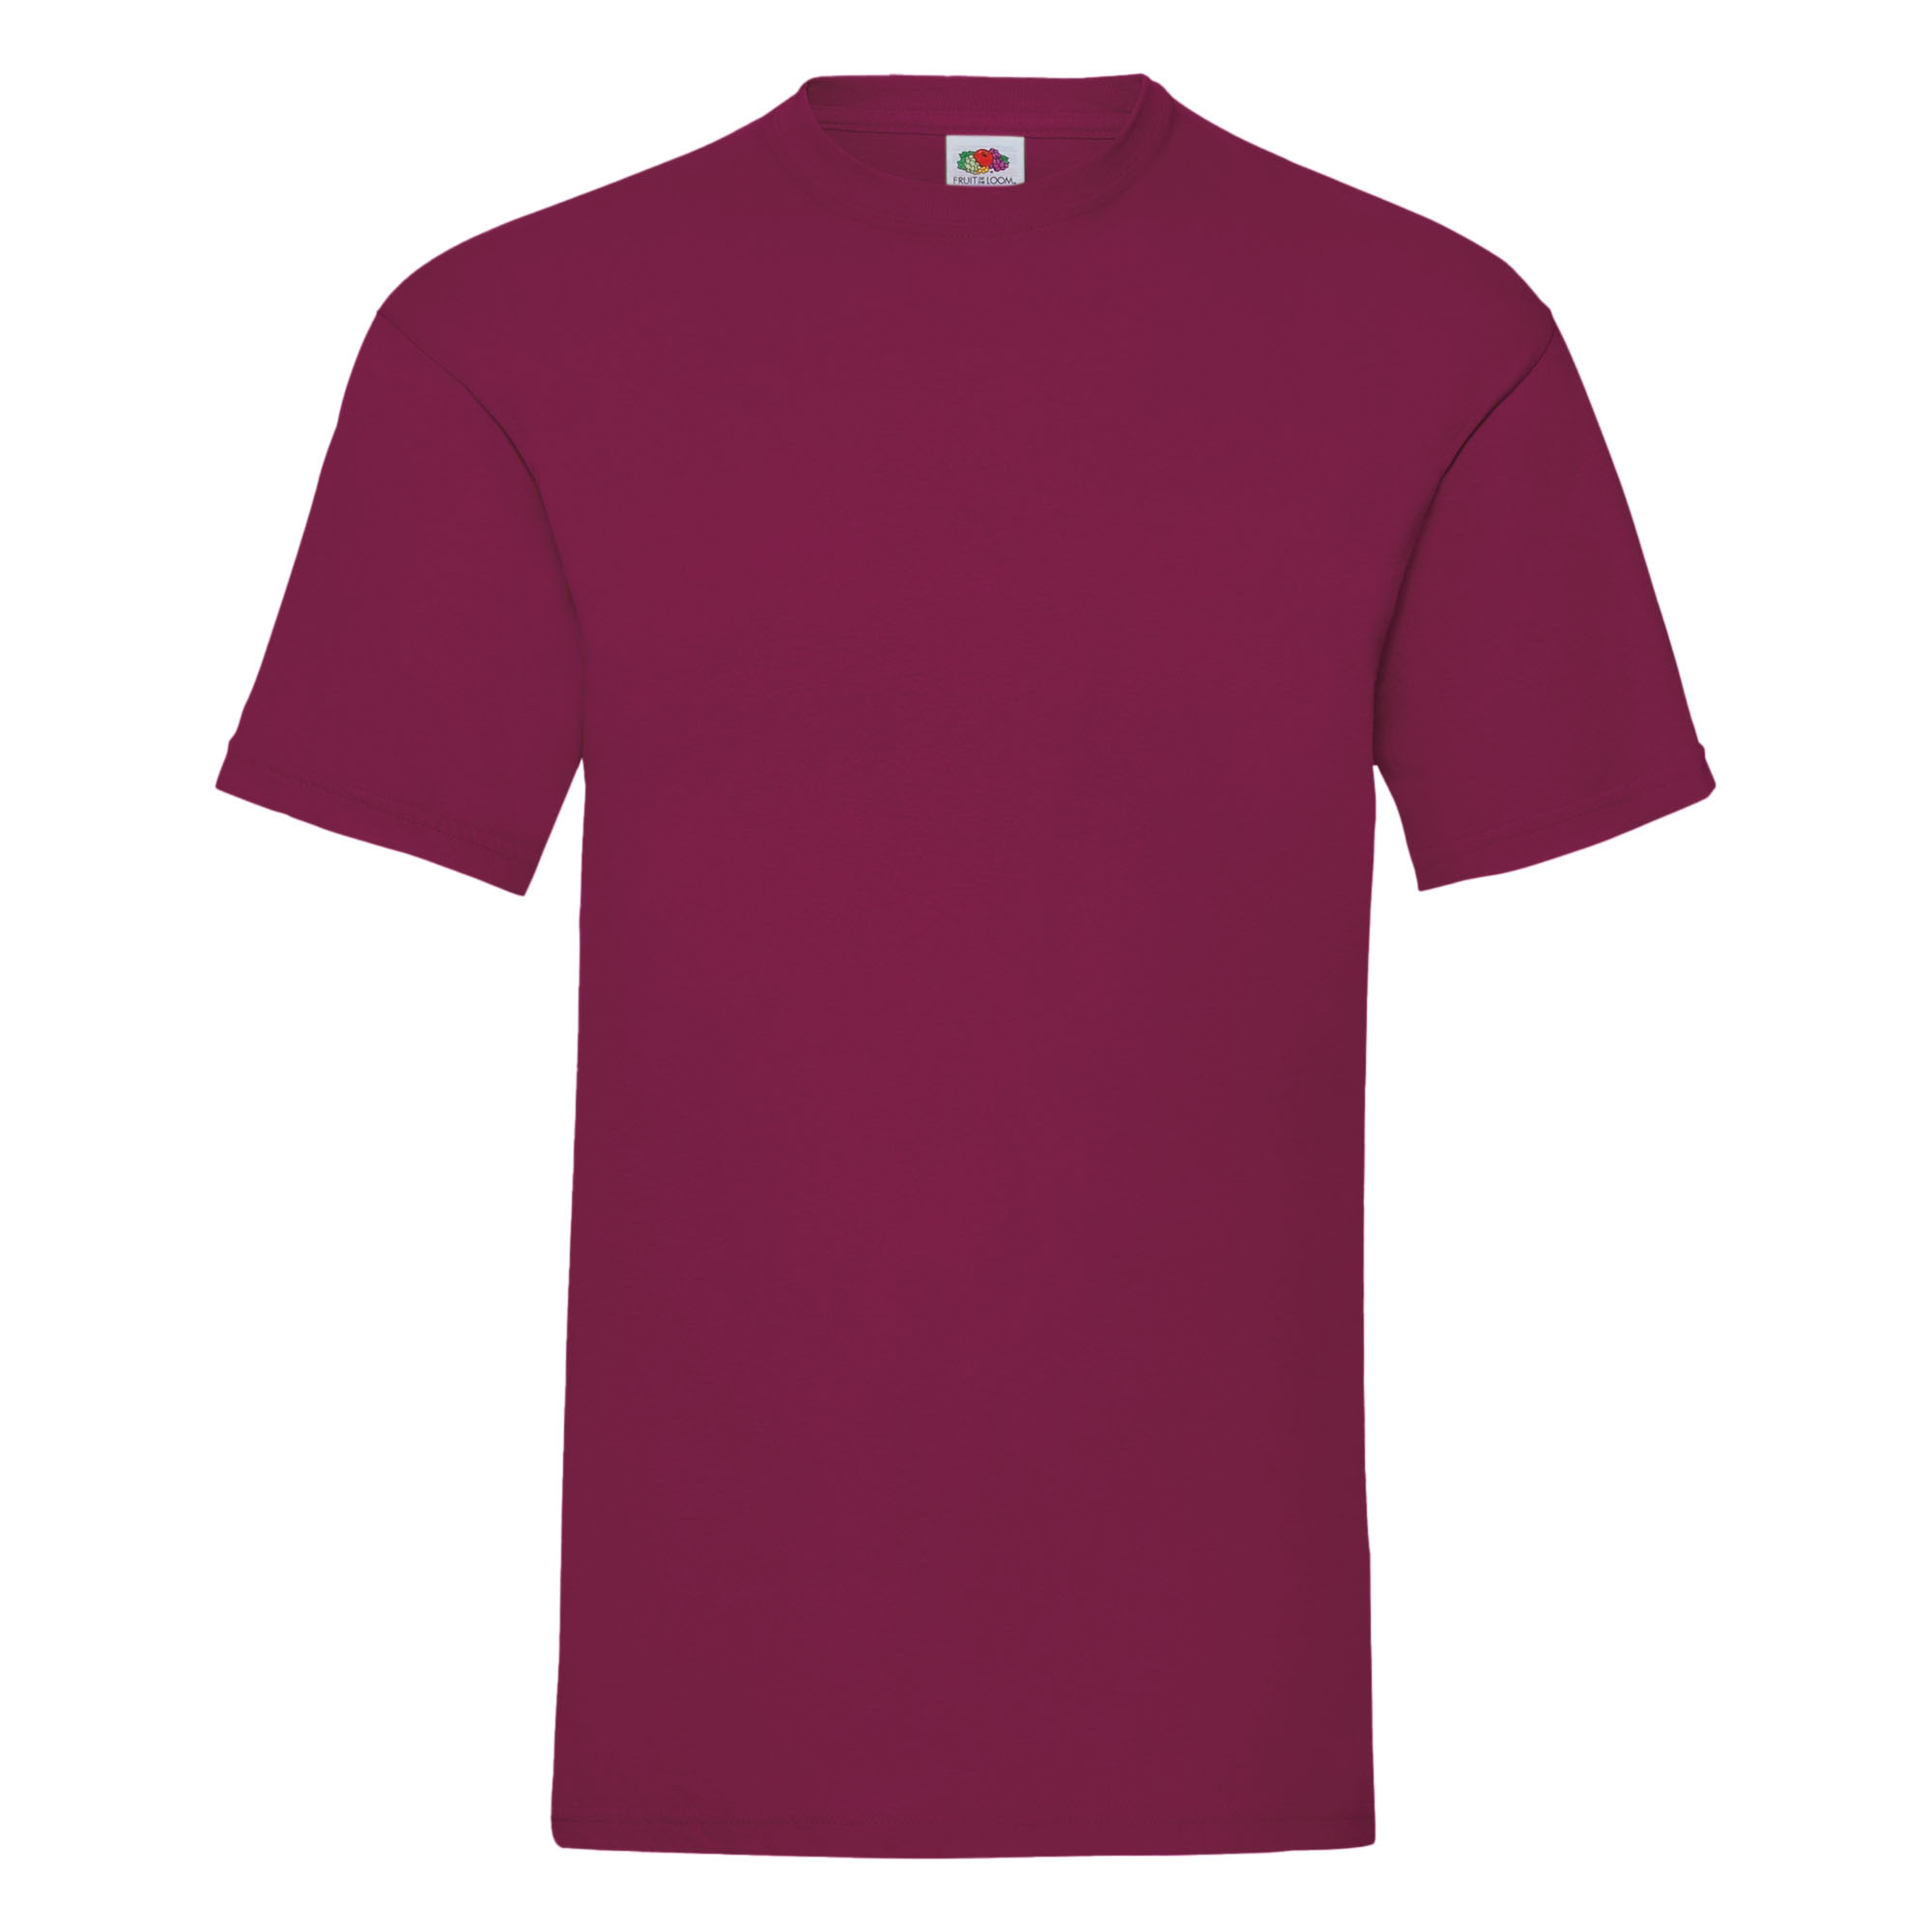 T-shirt Fruit Of The Loom Valueweight - burgundy - 